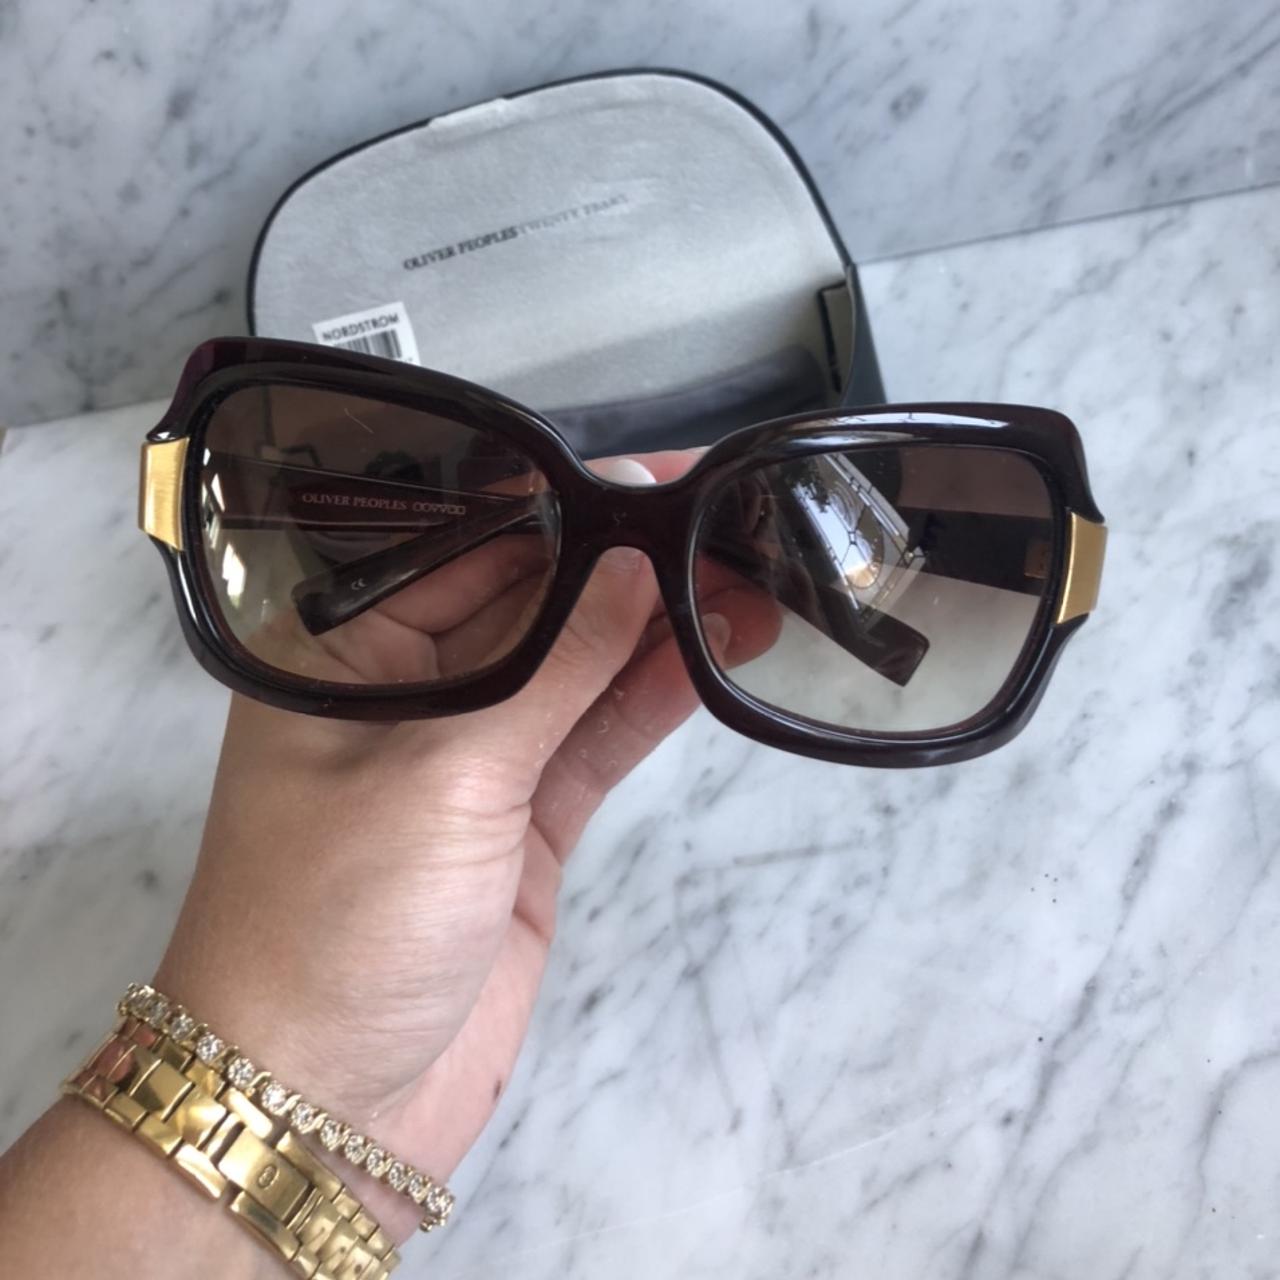 Oliver Peoples Women's Gold and Black Sunglasses